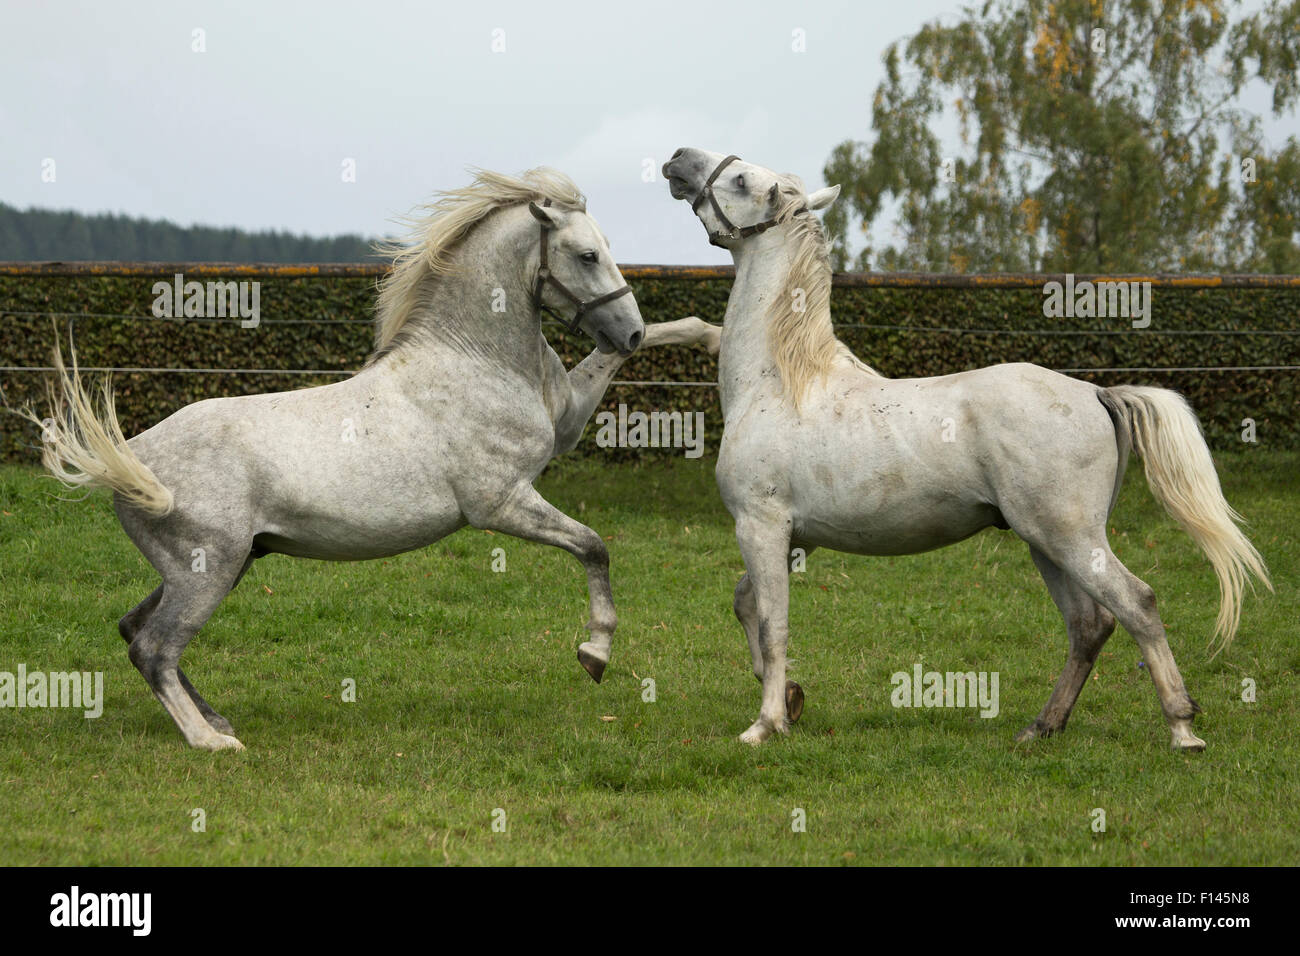 Two Lipizzaner colts play fighting, Piber Federal Stud, Maria Lankowitz, Koflach, Styria, Austria, September. Editorial use only. Stock Photo